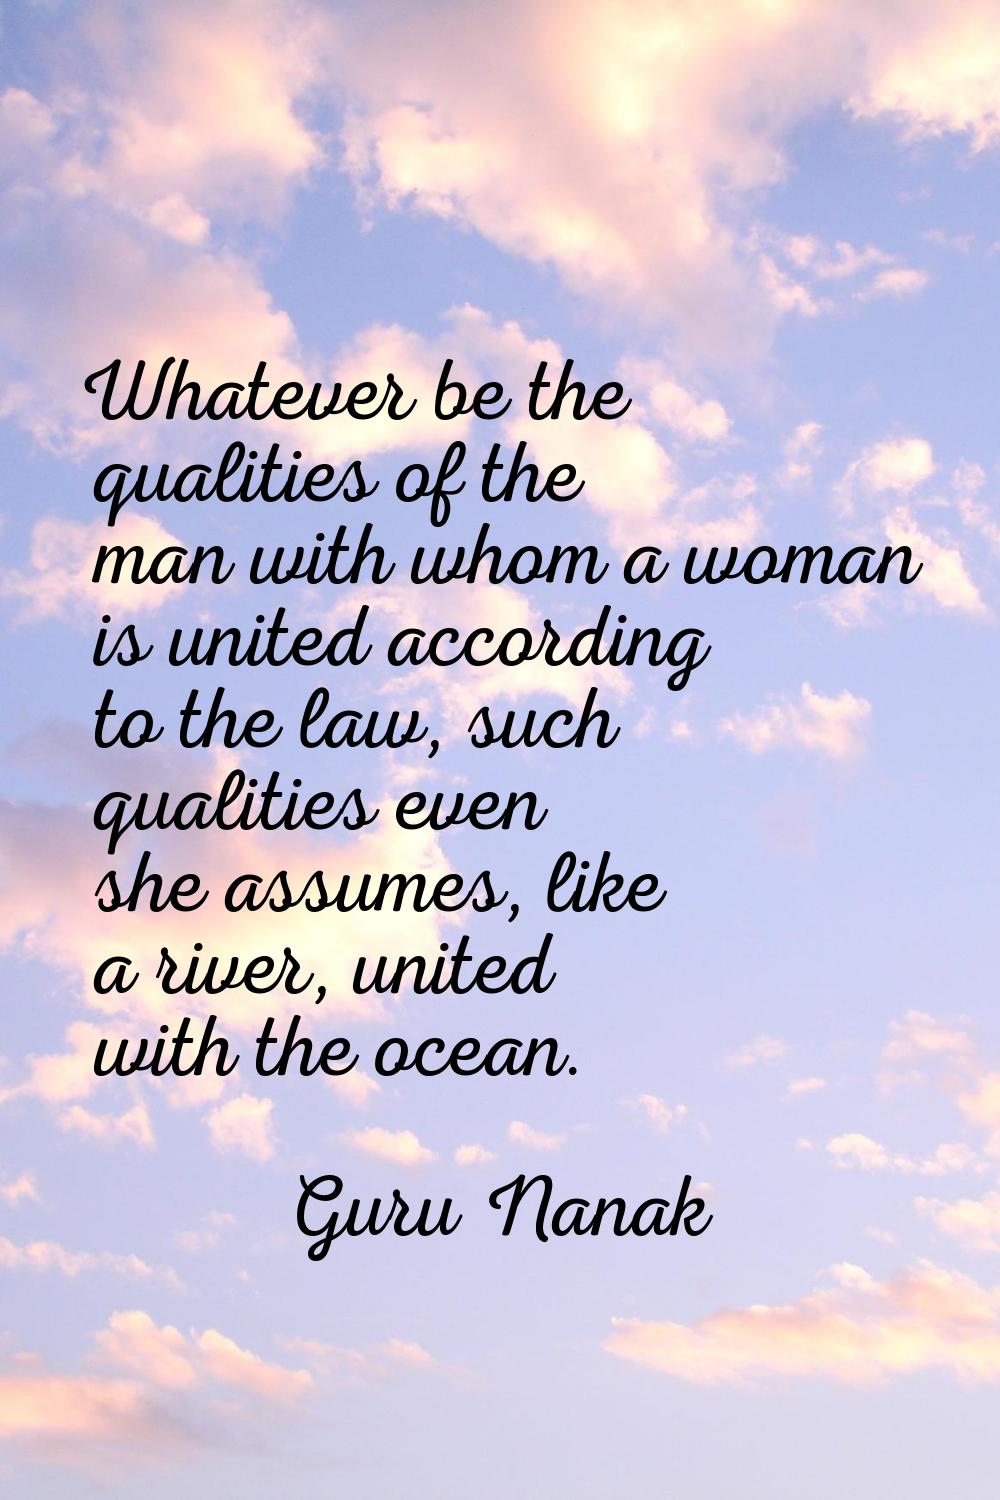 Whatever be the qualities of the man with whom a woman is united according to the law, such qualiti